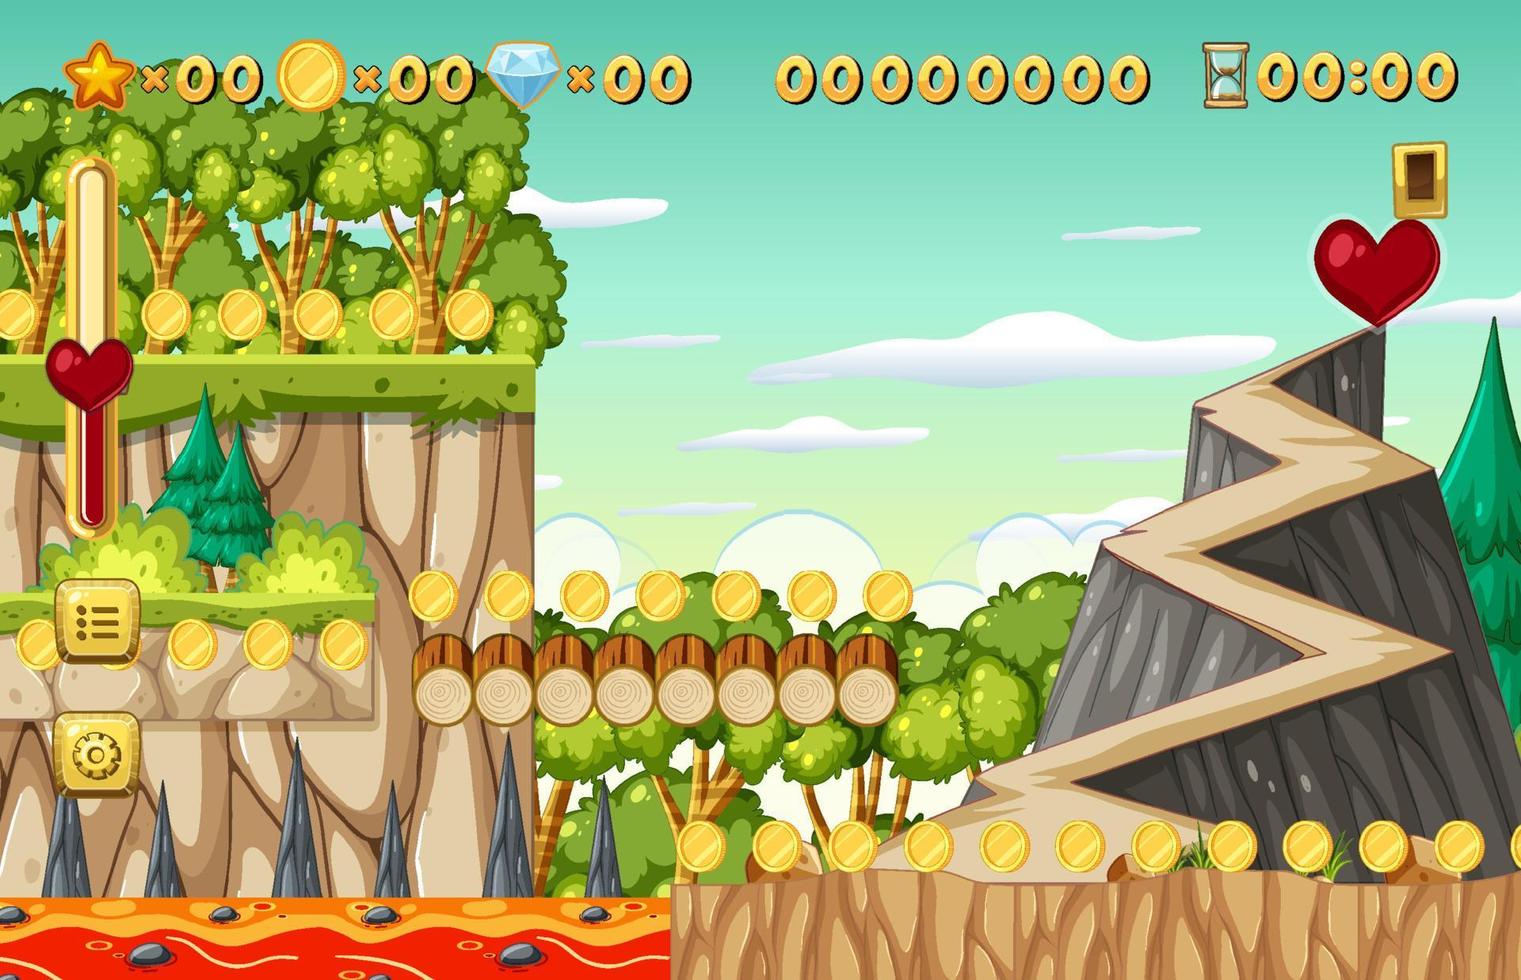 Collecting Coins Platformer Game Template vector